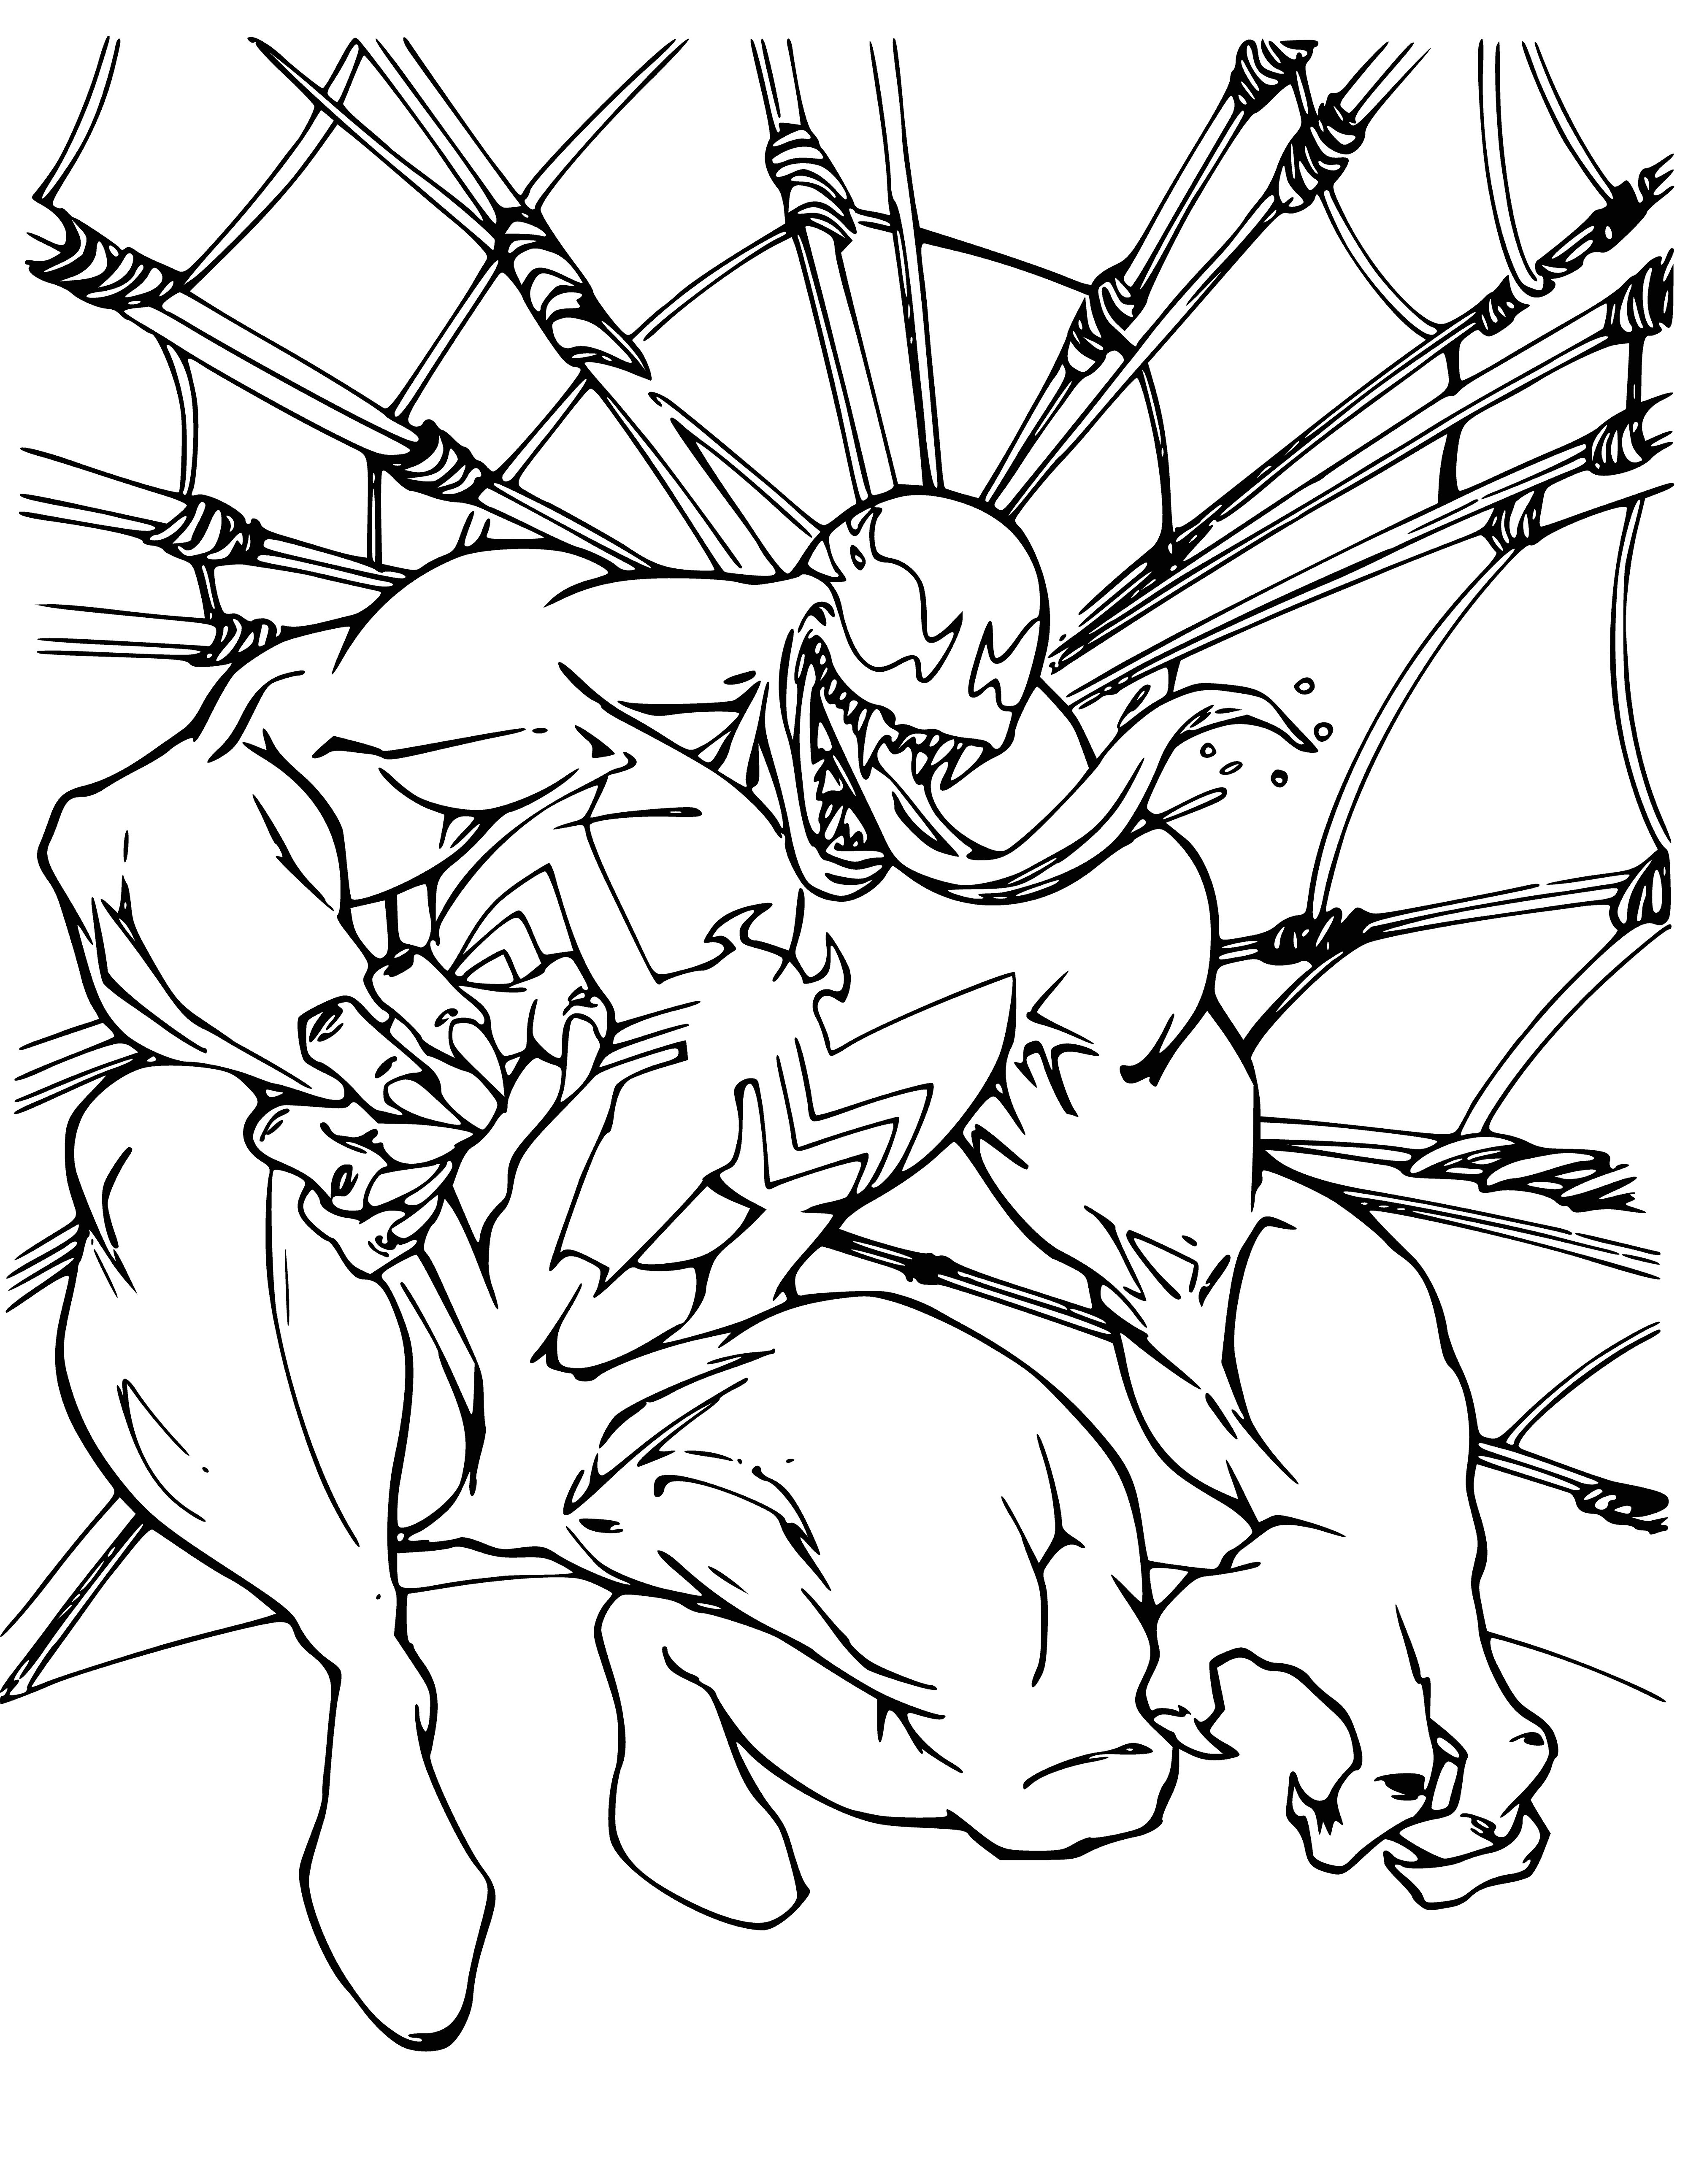 coloring page: Spider-Man wears an all-black suit with a white spider logo, white-eyed mask, wings and large staff.